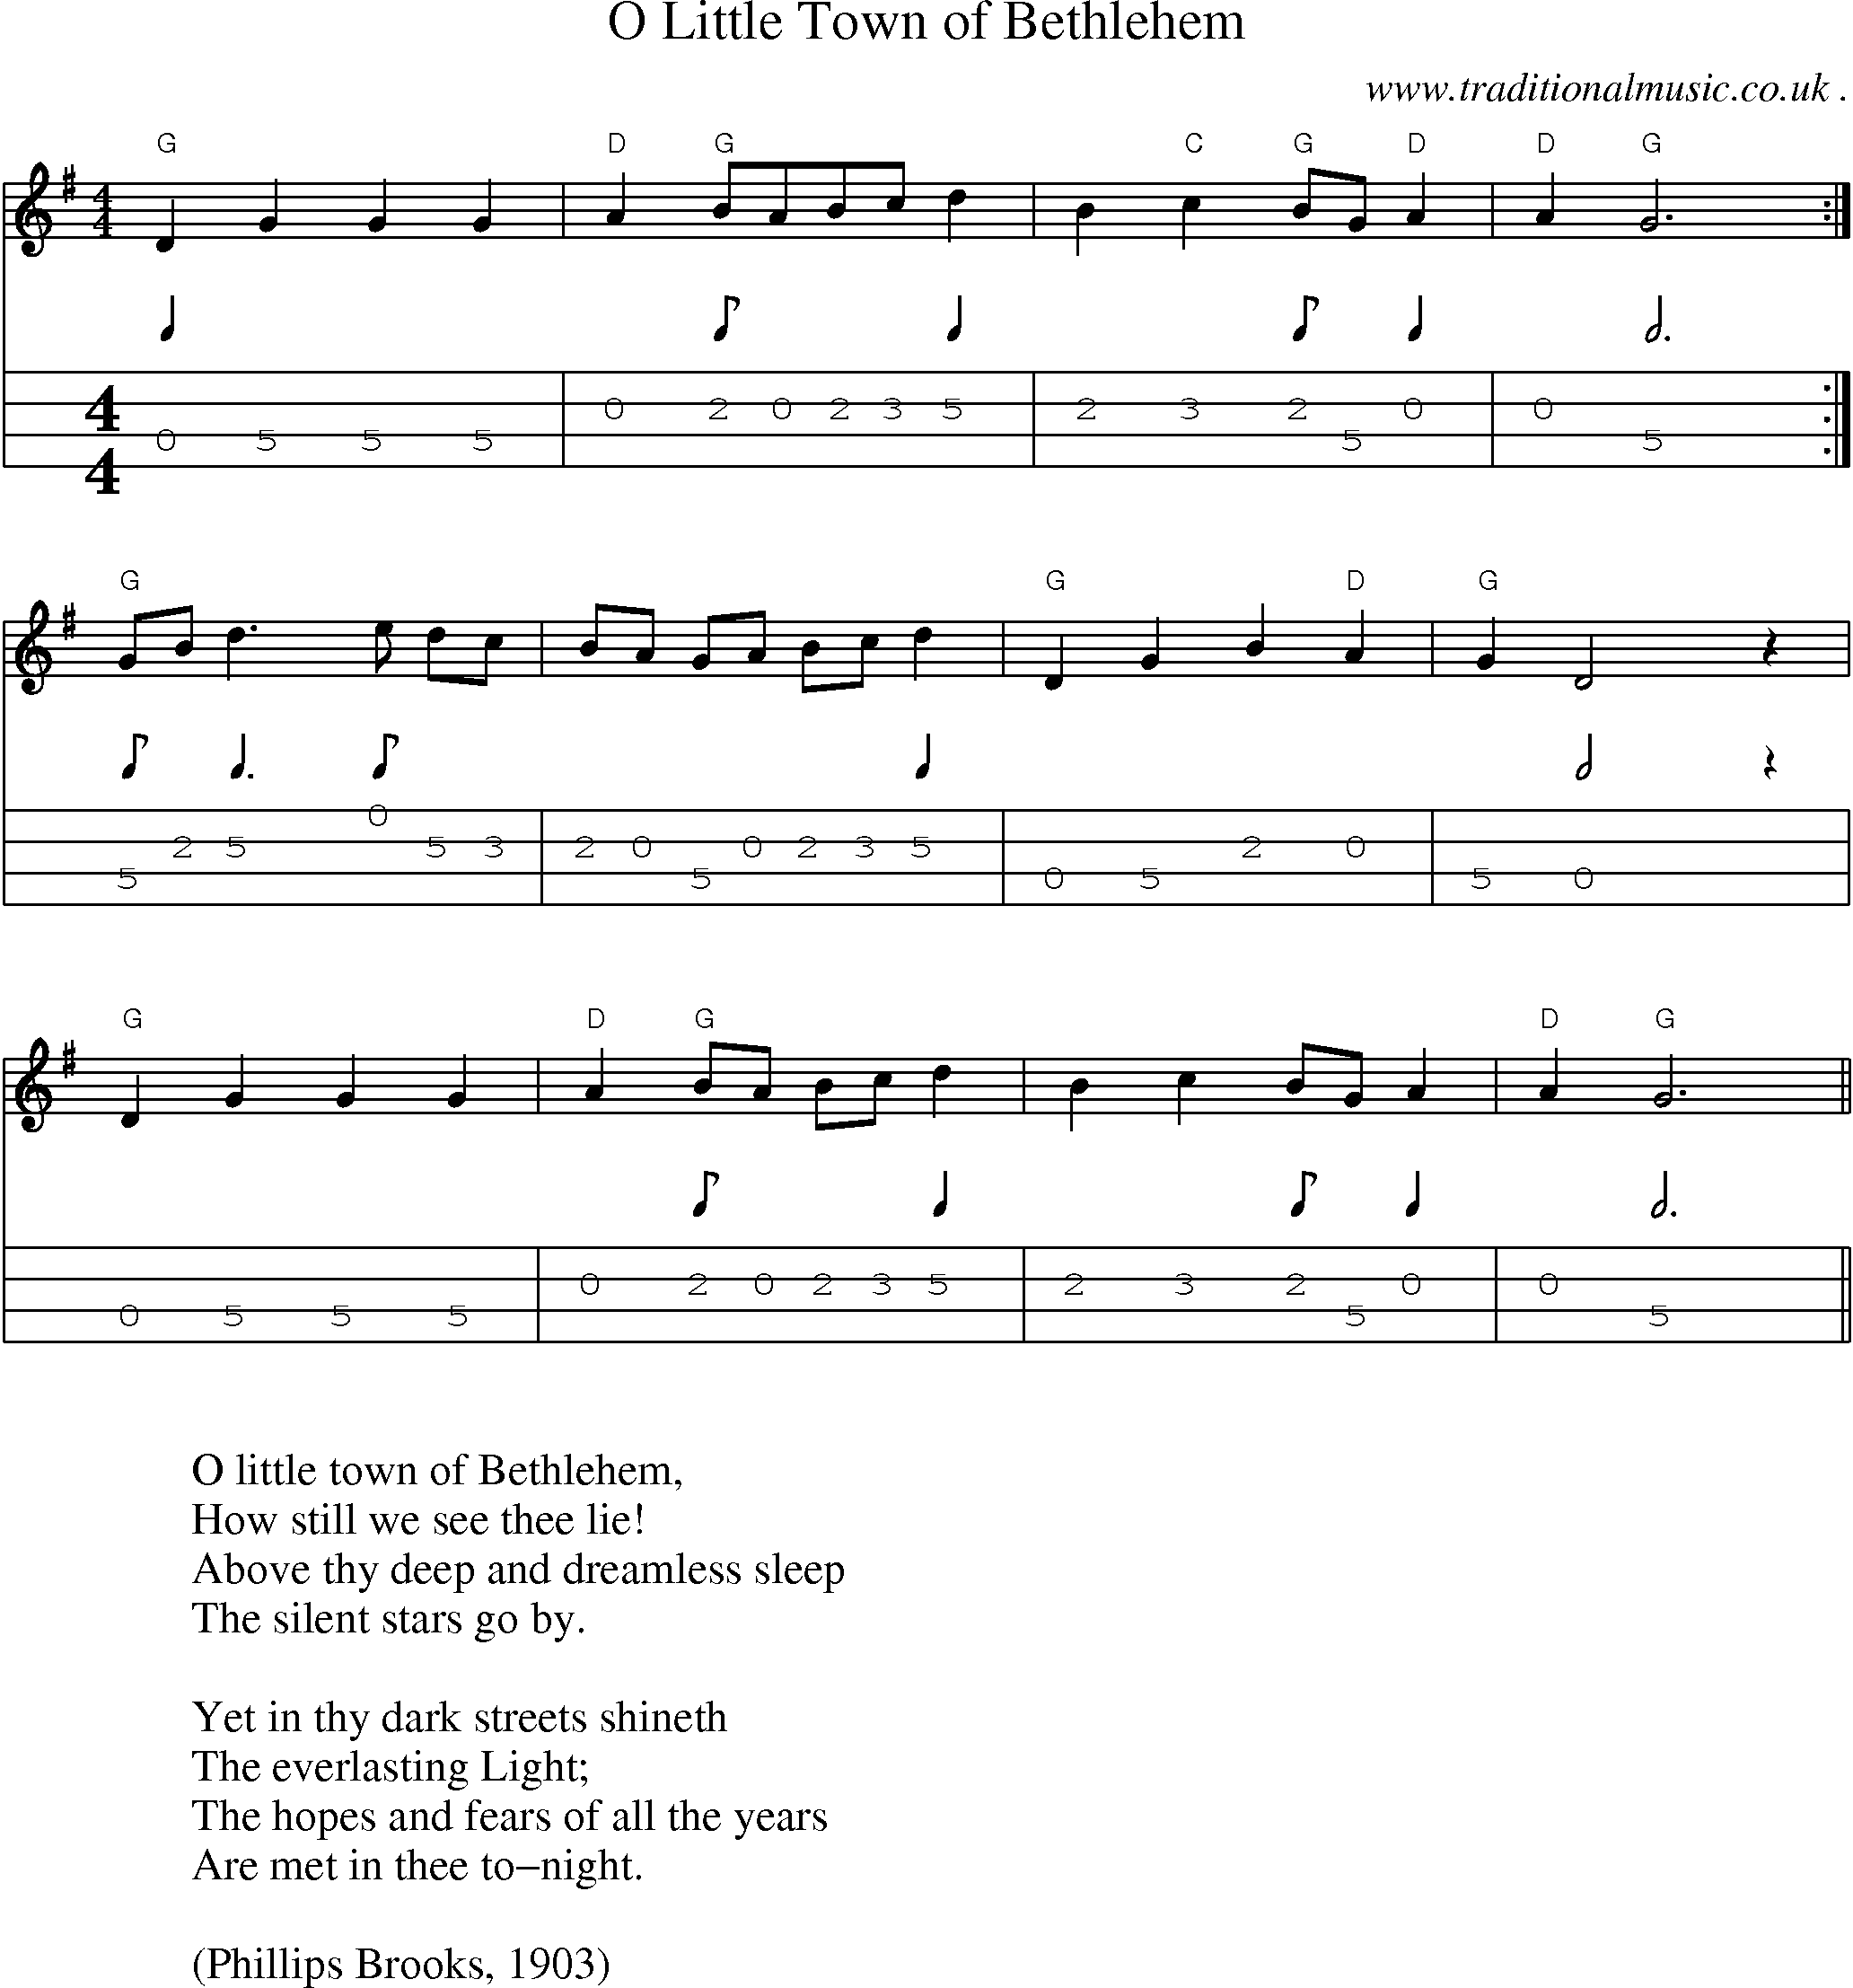 Music Score and Guitar Tabs for O Little Town of Bethlehem